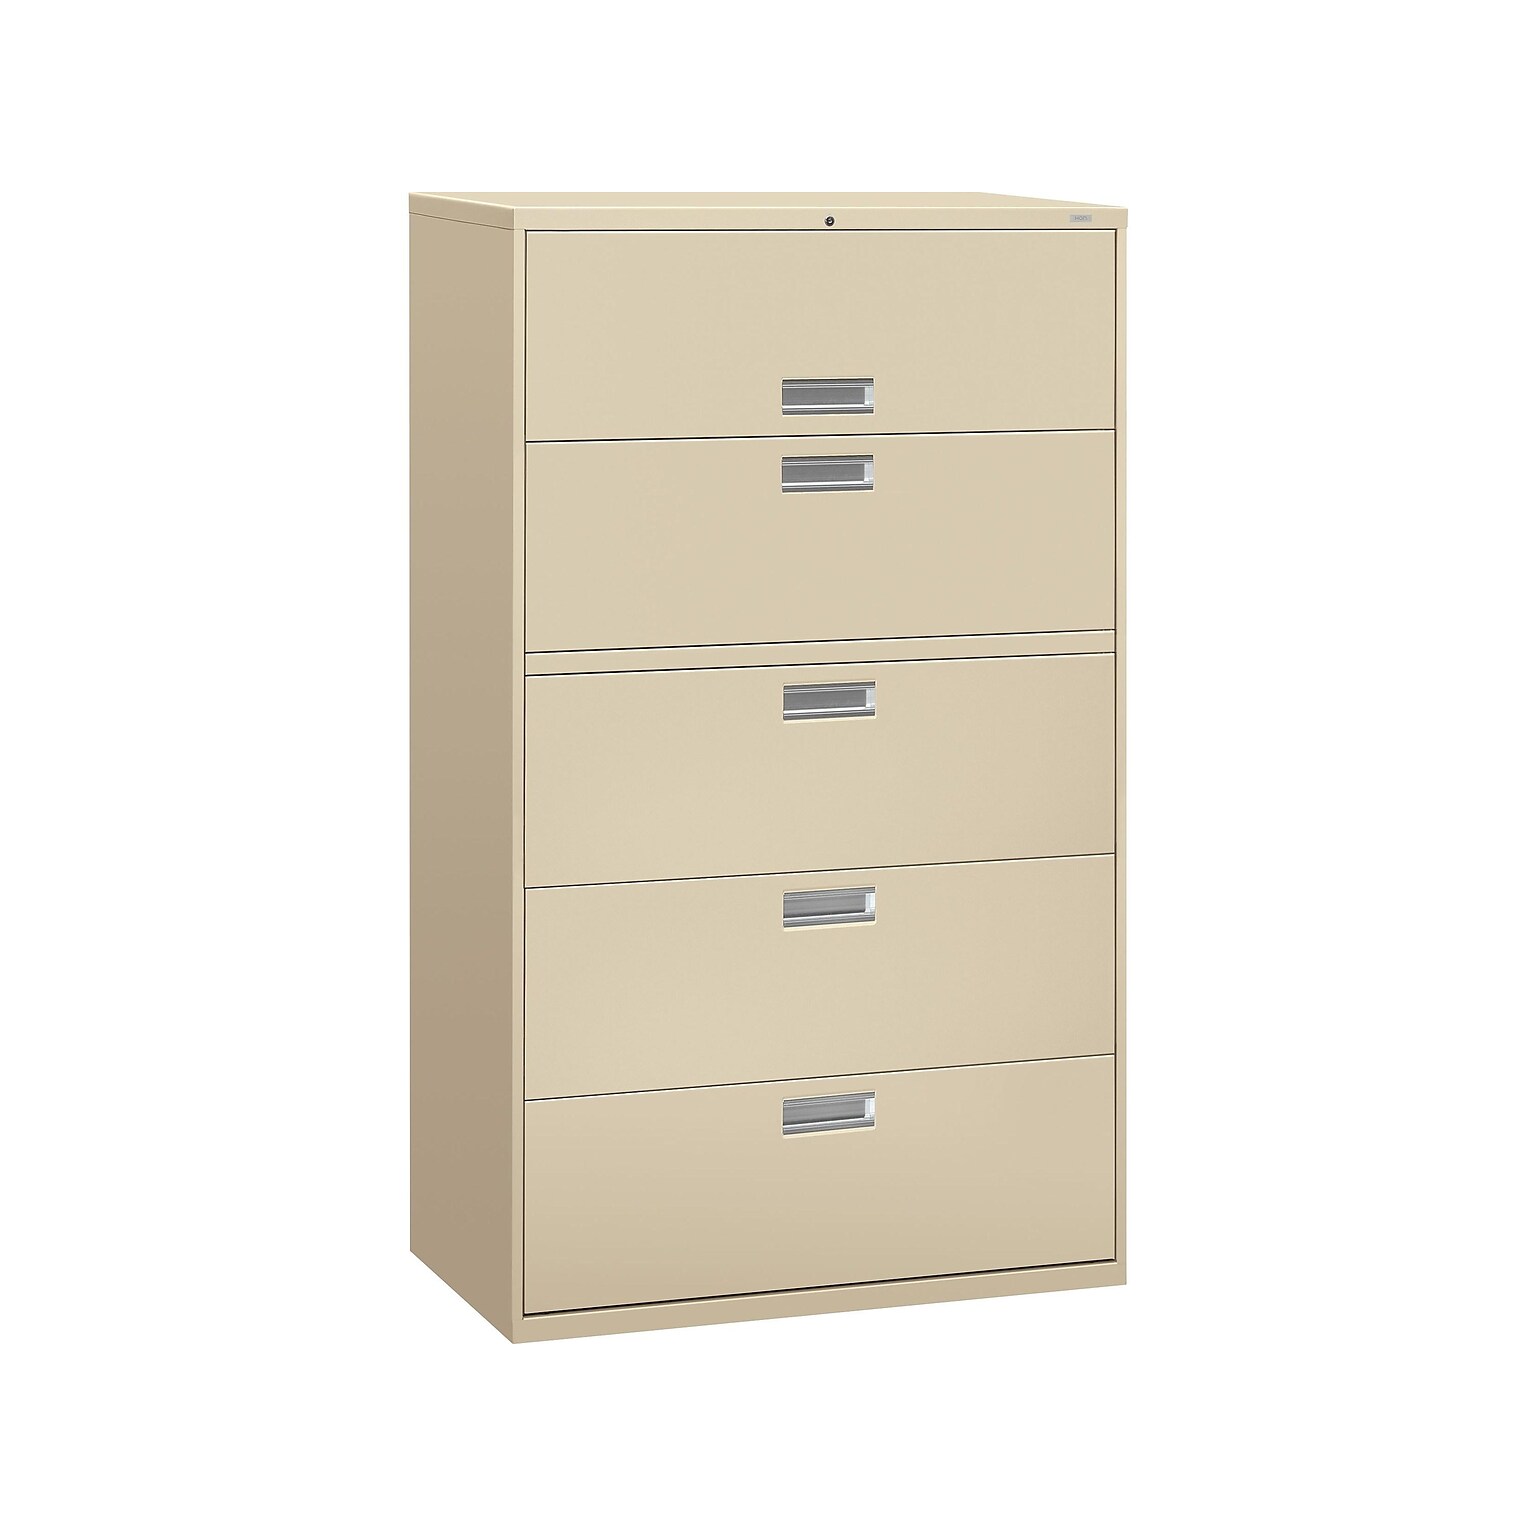 HON Brigade 600 Series 5-Drawer Lateral File Cabinet, Locking, Letter/Legal, Putty/Beige, 42W (H695.L.L)